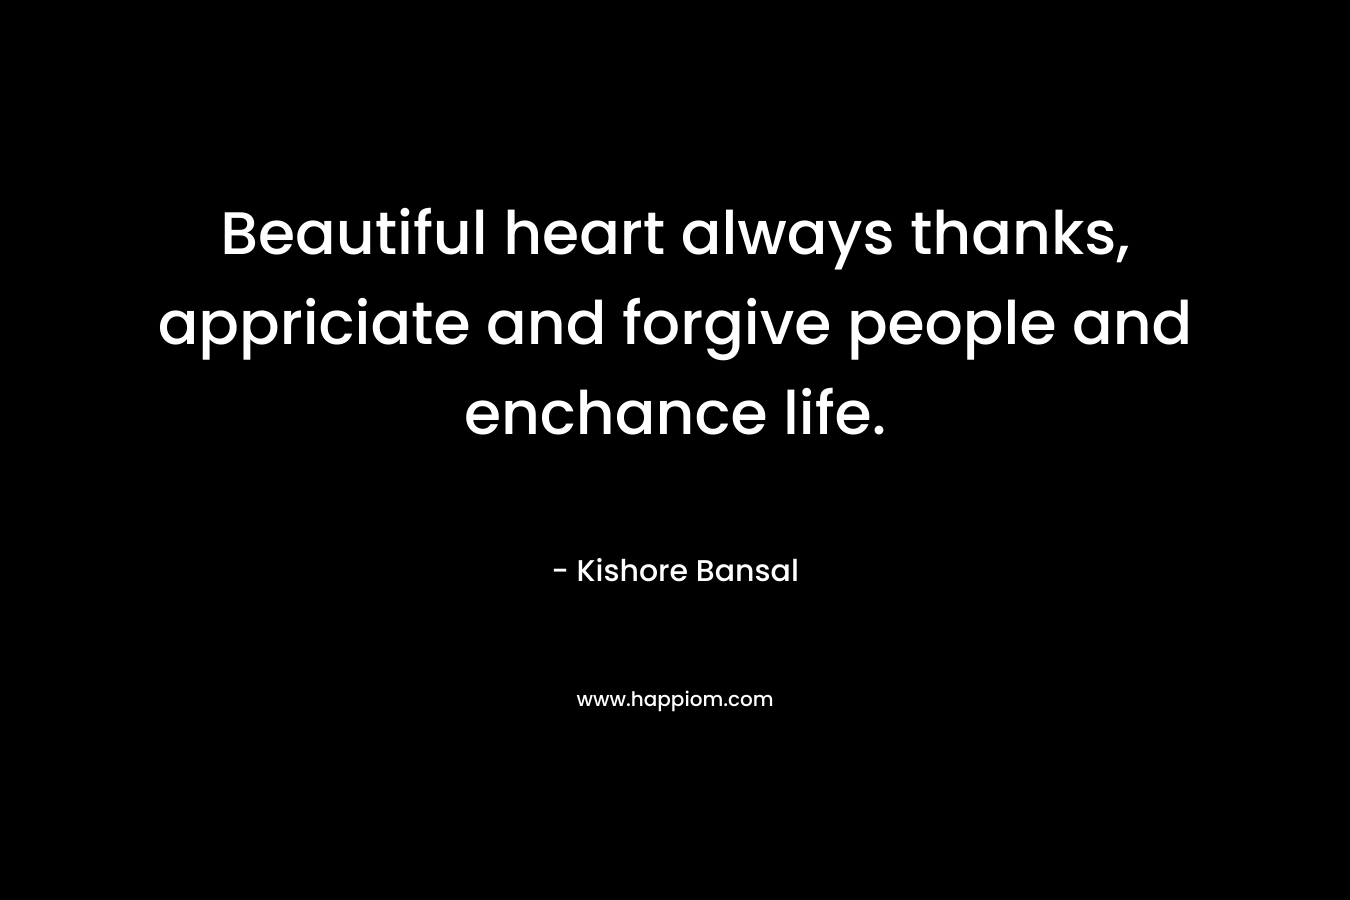 Beautiful heart always thanks, appriciate and forgive people and enchance life.